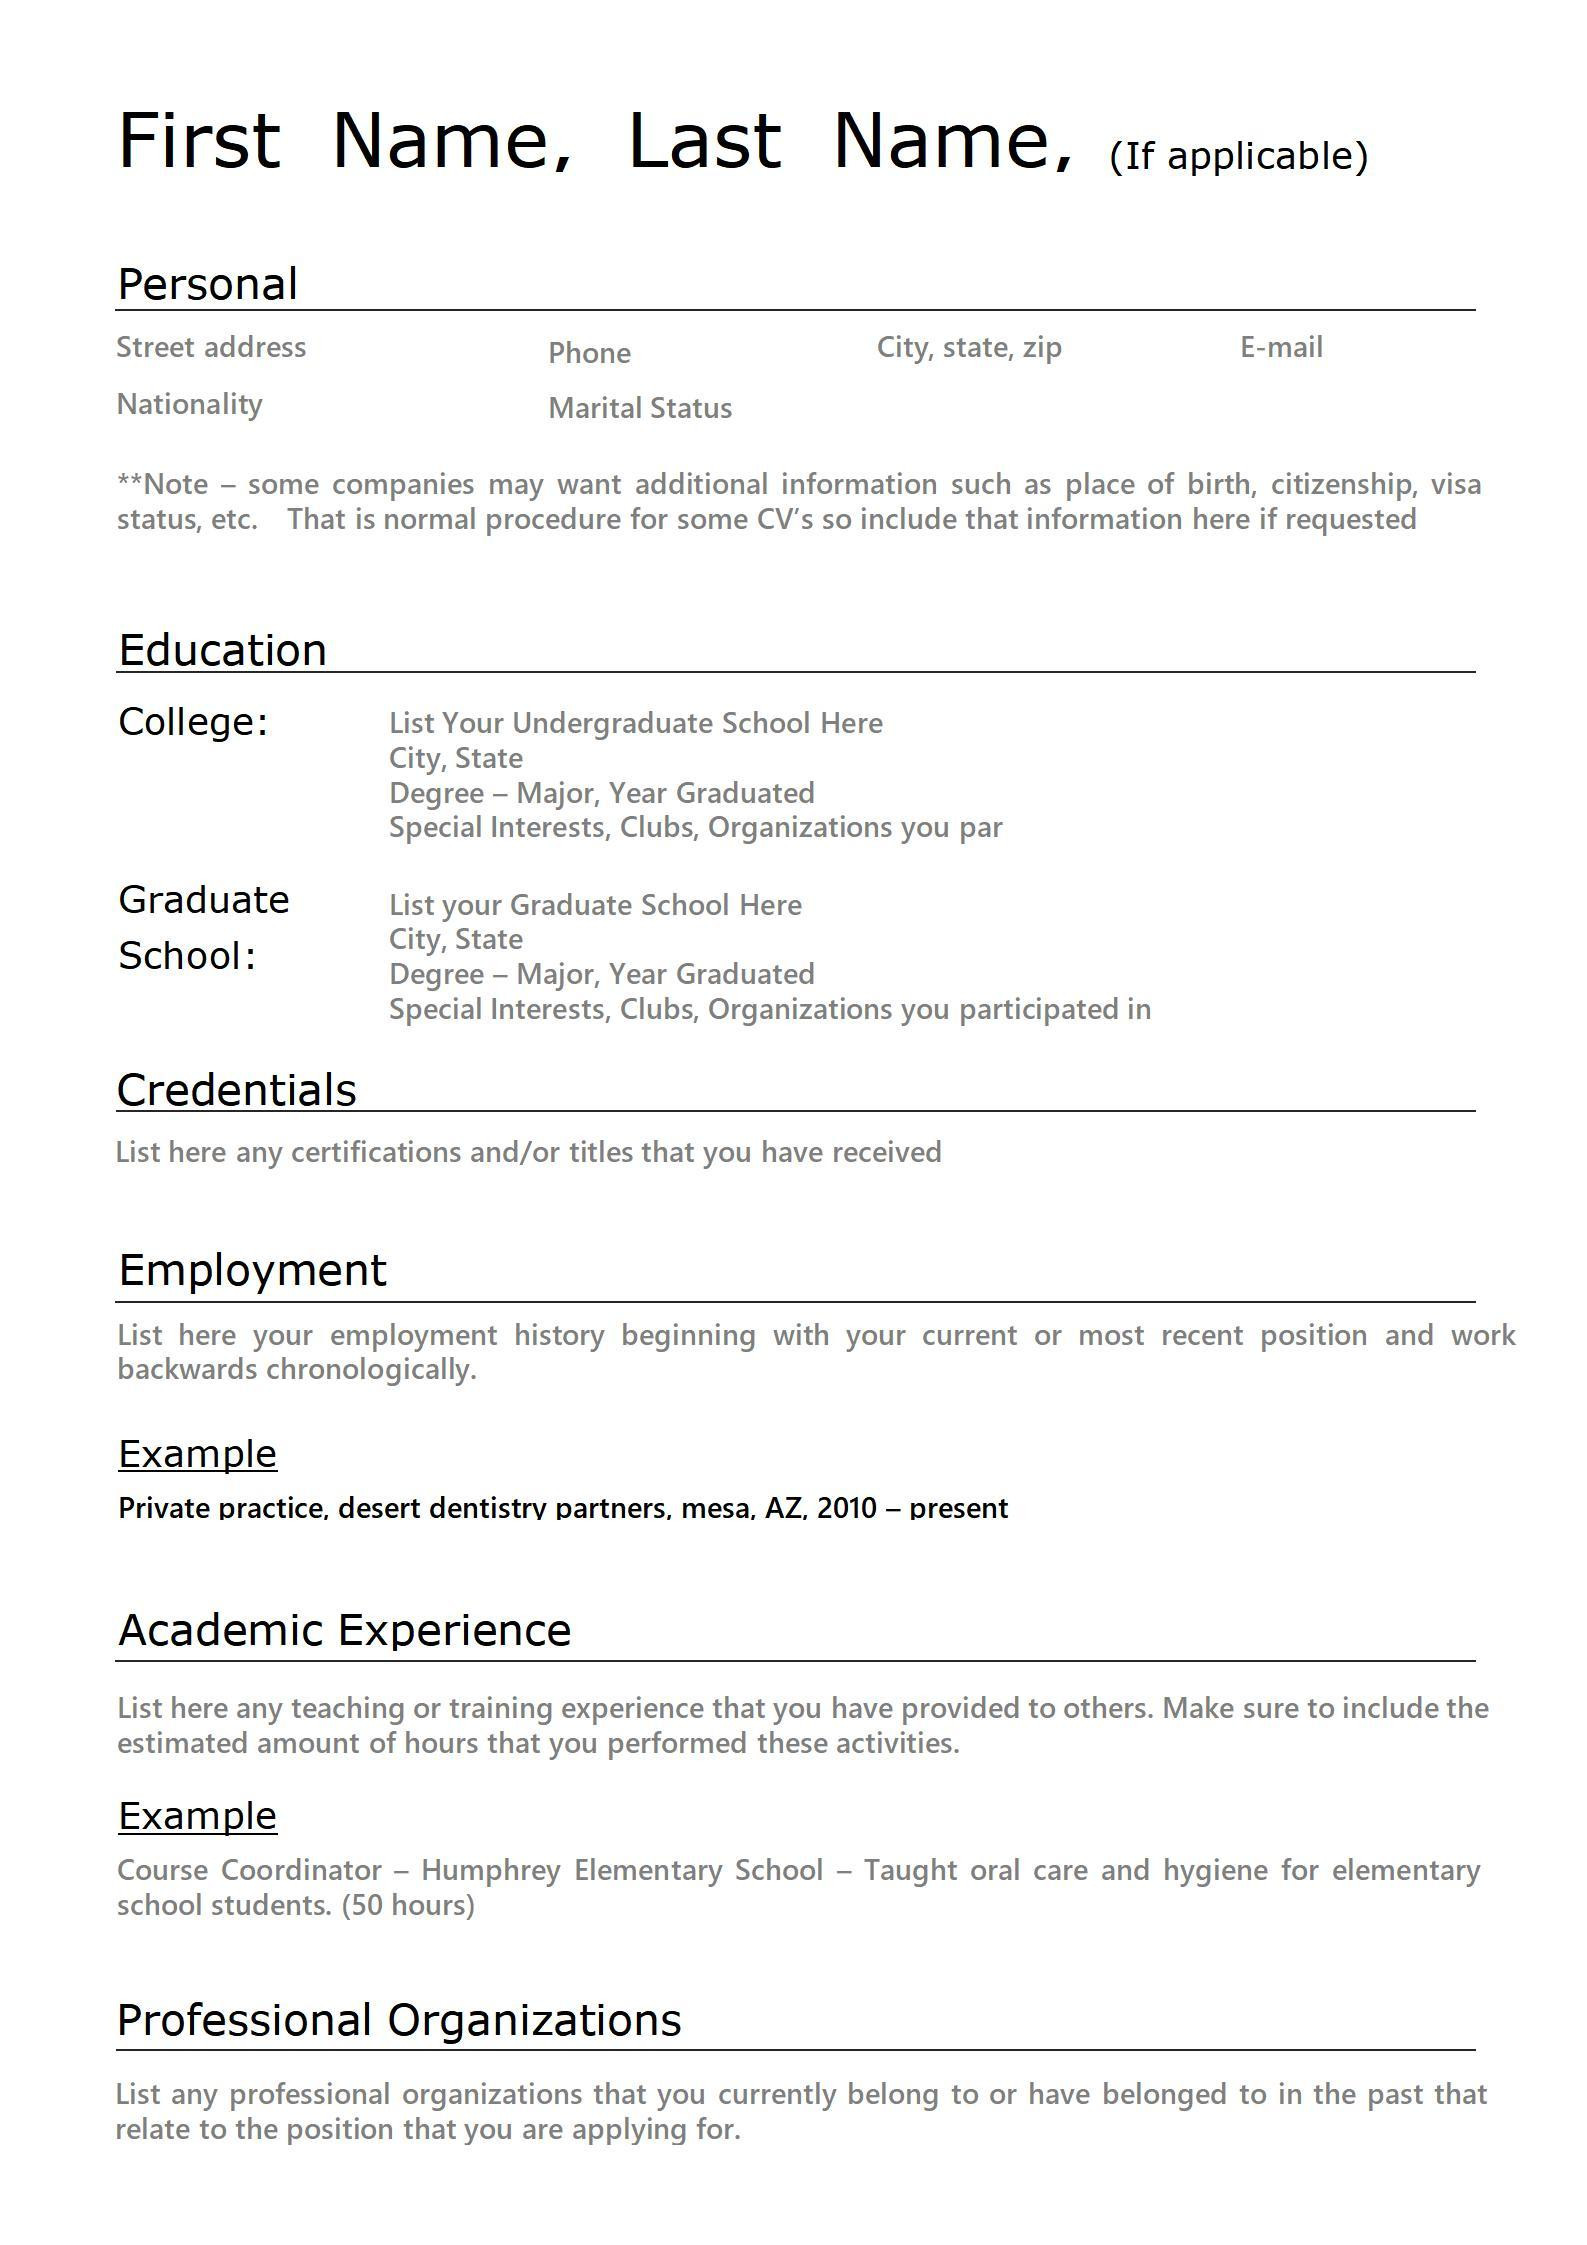 First Time Tutoring Job Resume Samples First-time Resume with No Experience Samples Wps Office Academy